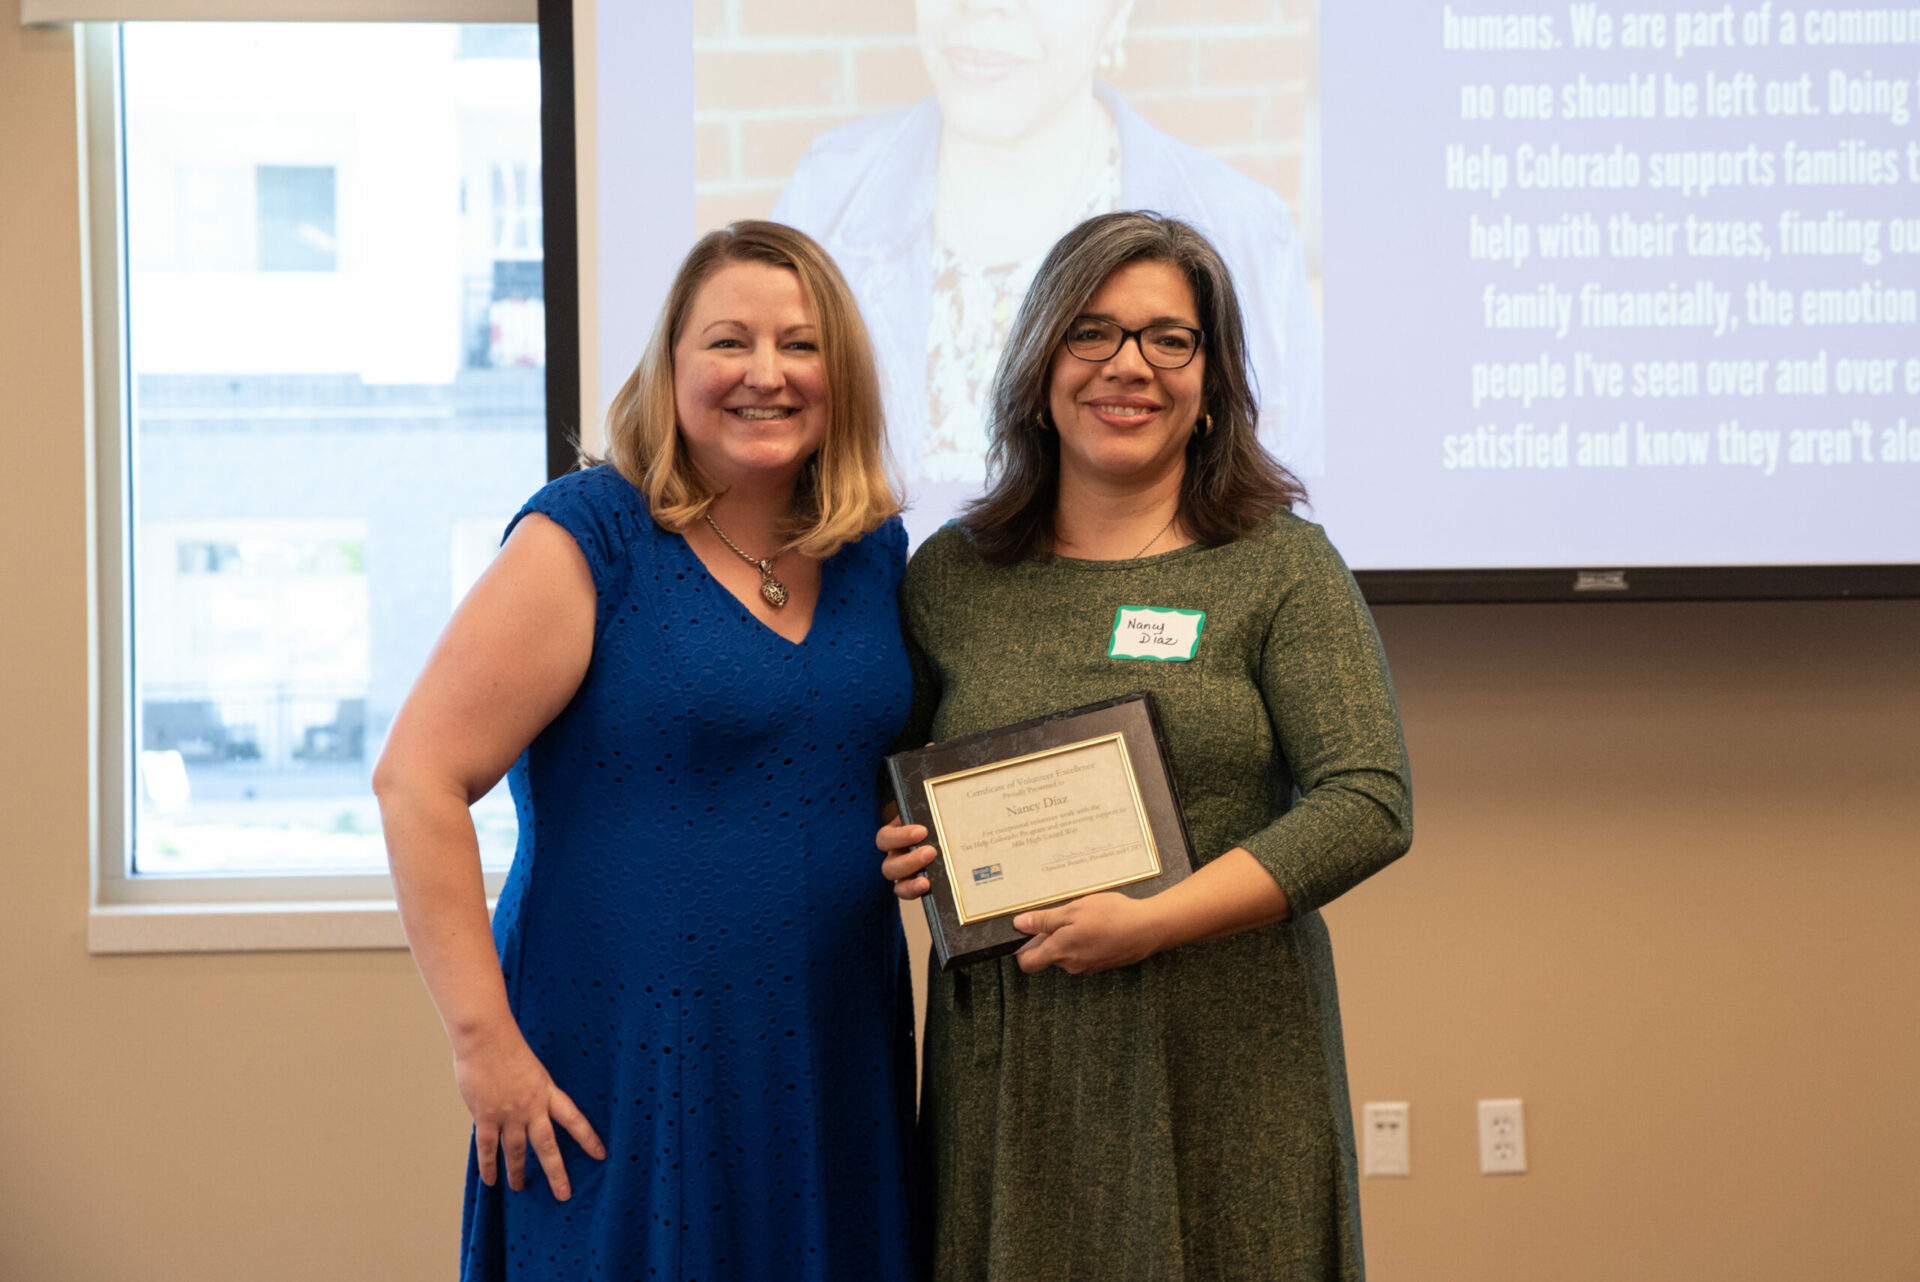 Tax Help Volunteer Nancy Diaz is pictured holding a certificate recognizing her contributions to the free tax assistance program. Joining her is Kristin Hubbard, Program Manager for Tax Help Colorado.